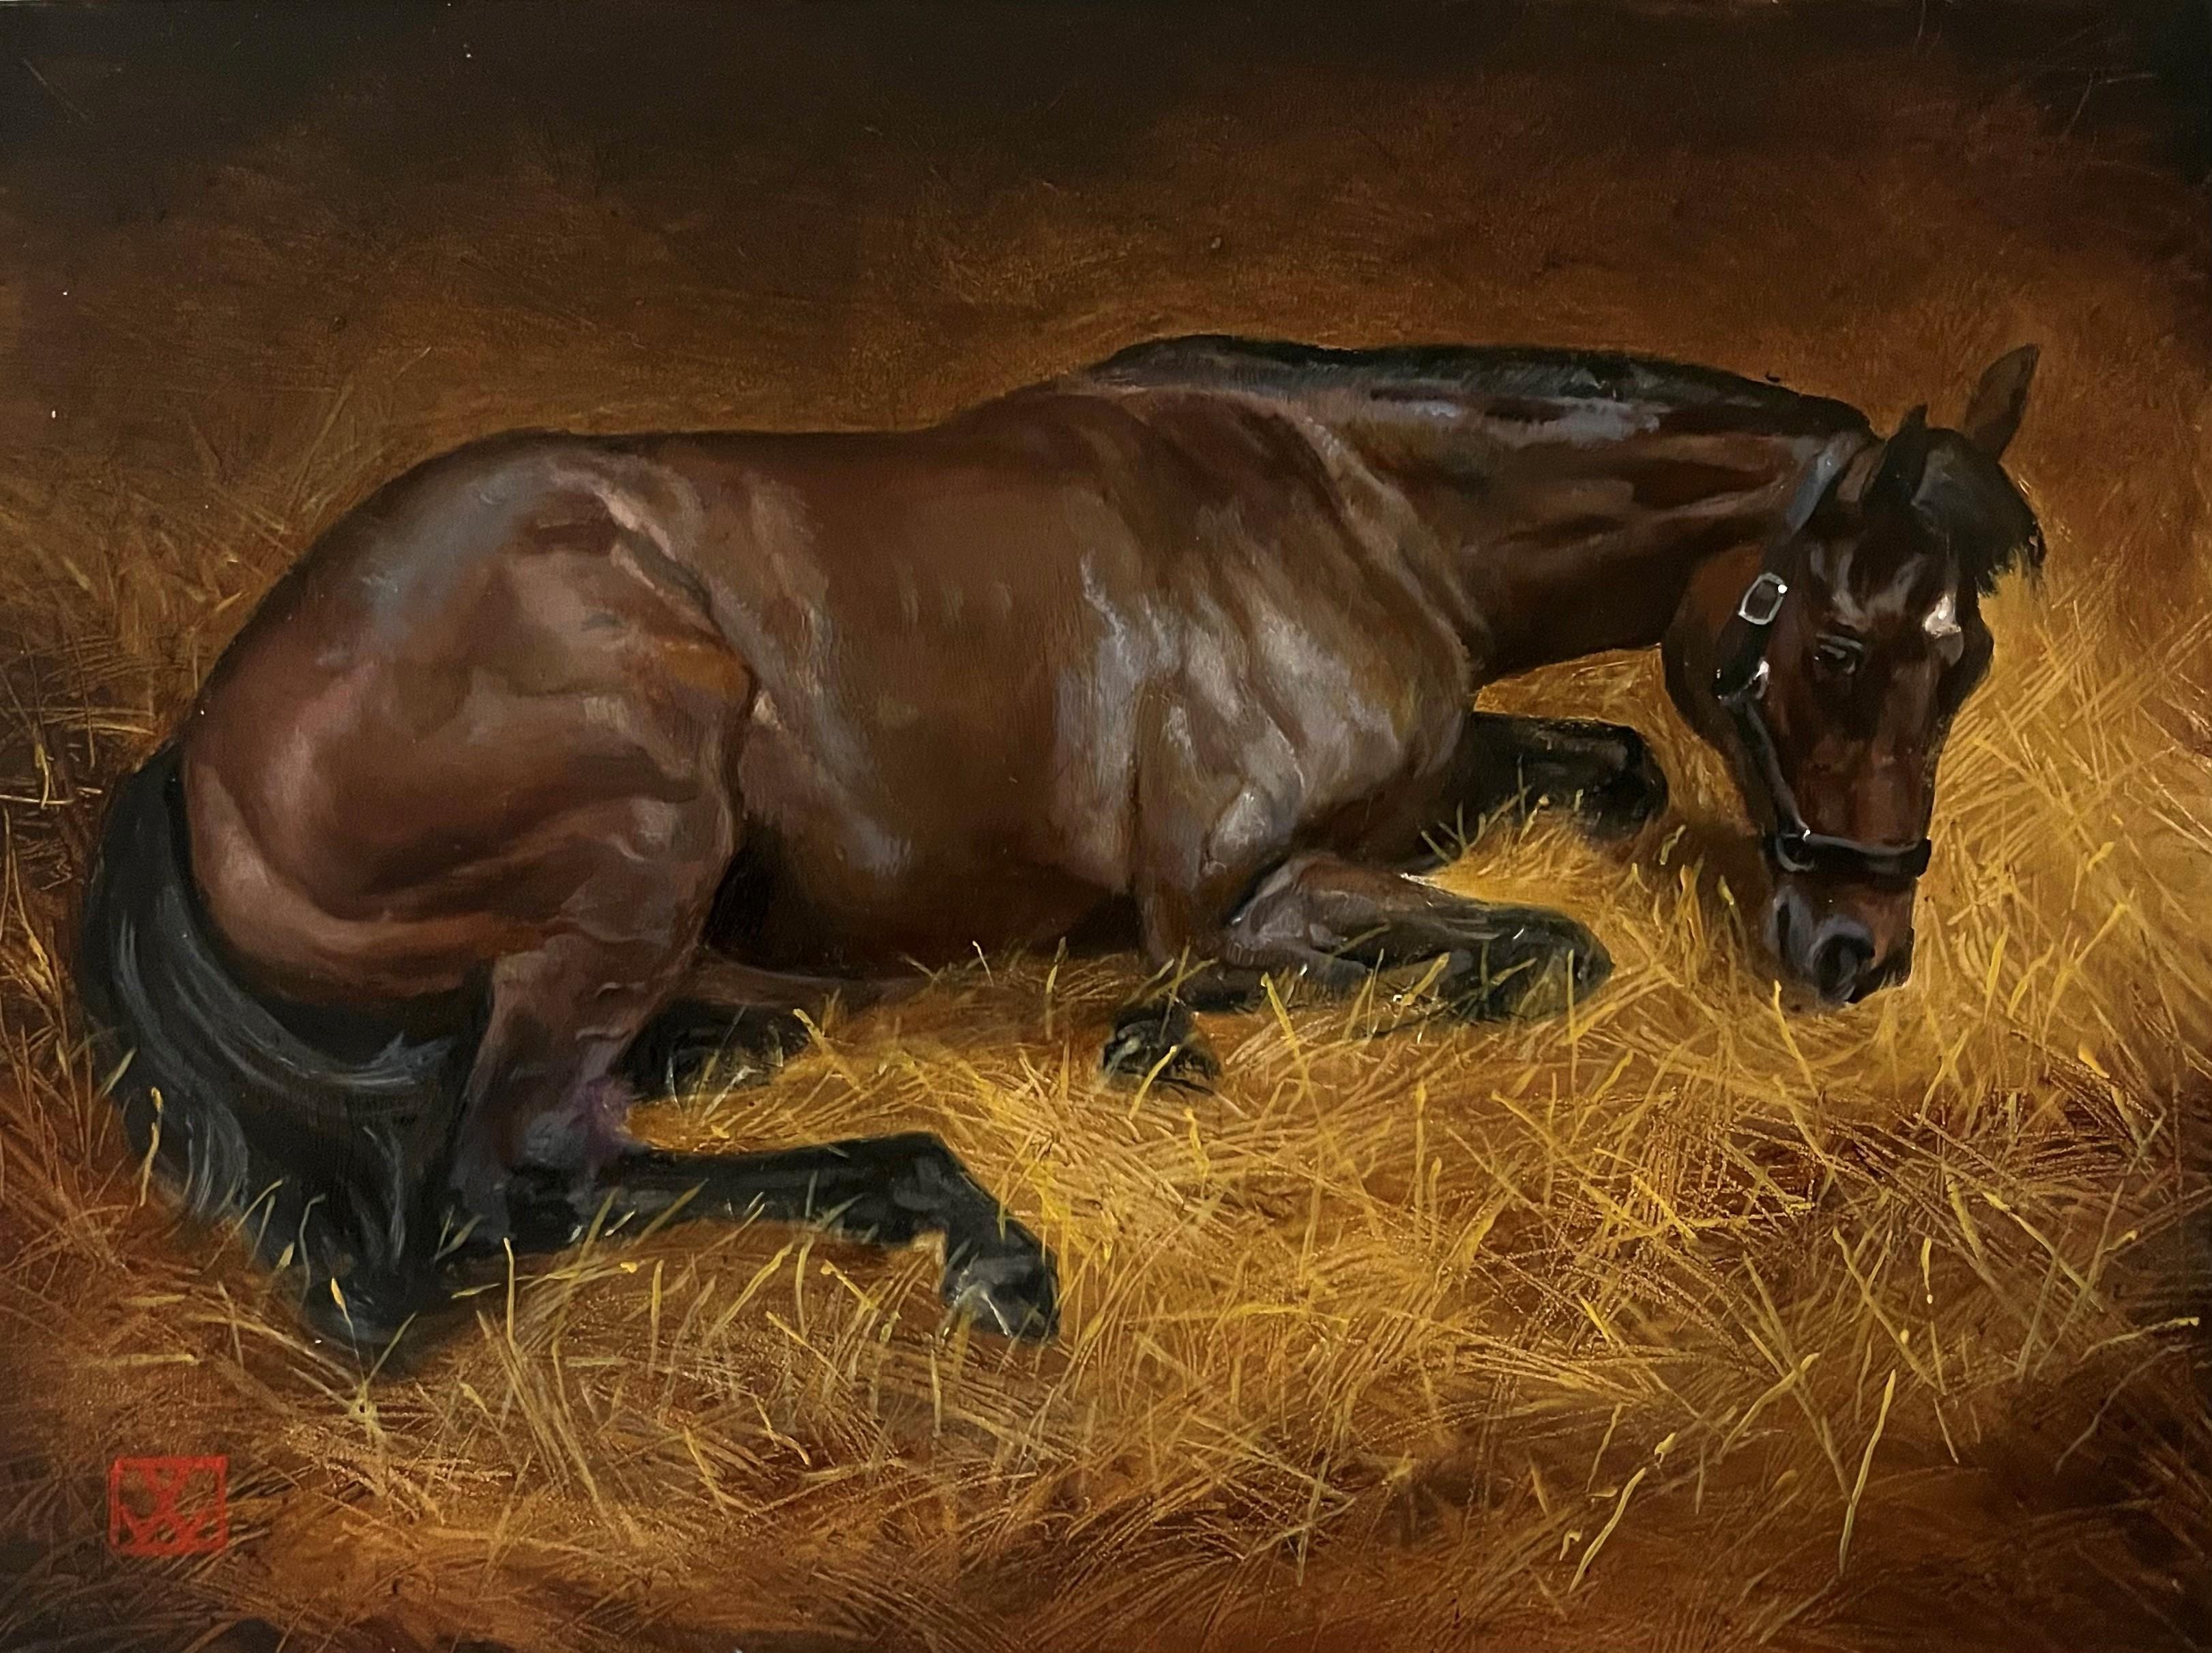 Painting of a Horse Waking up after a Comfortable Snooze in A Cozy Sunlit Stall 